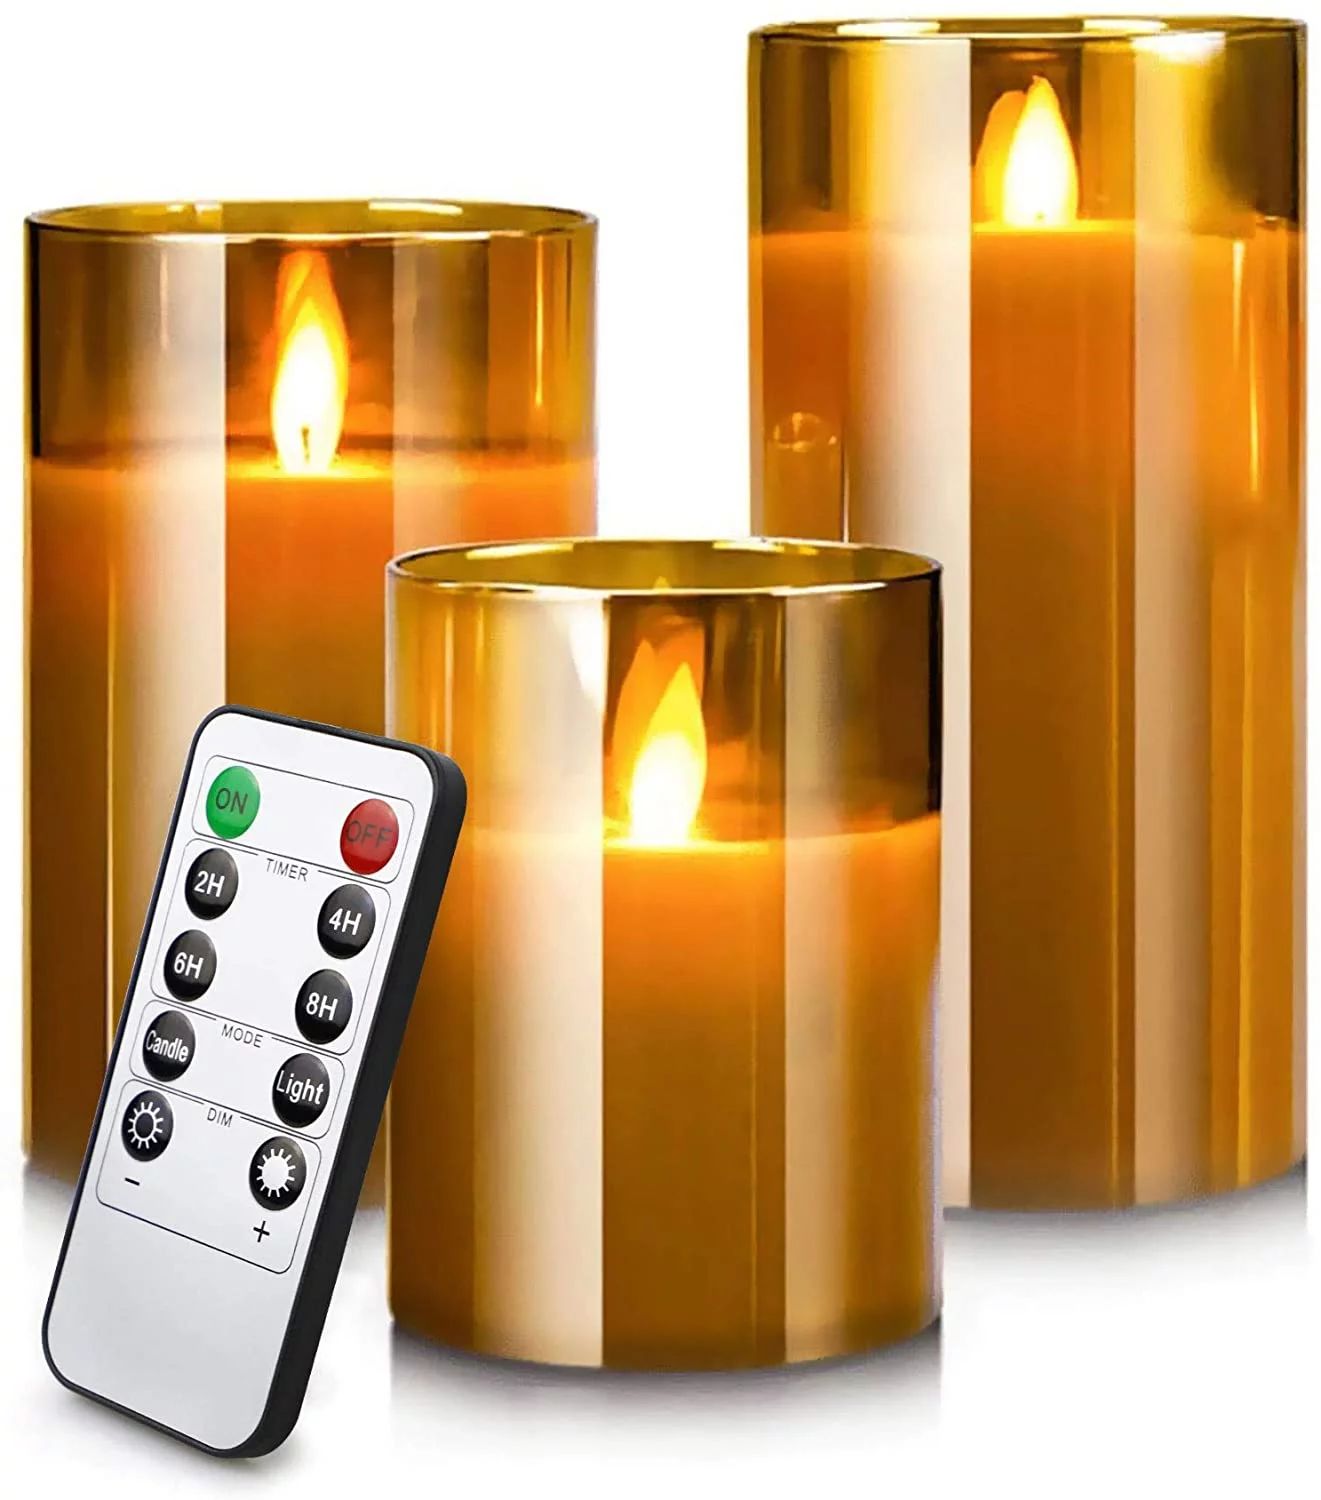 YFYTRE set of 3 Led flameless glass candles that can be remotely controlled and set to turn off ... | Walmart (US)